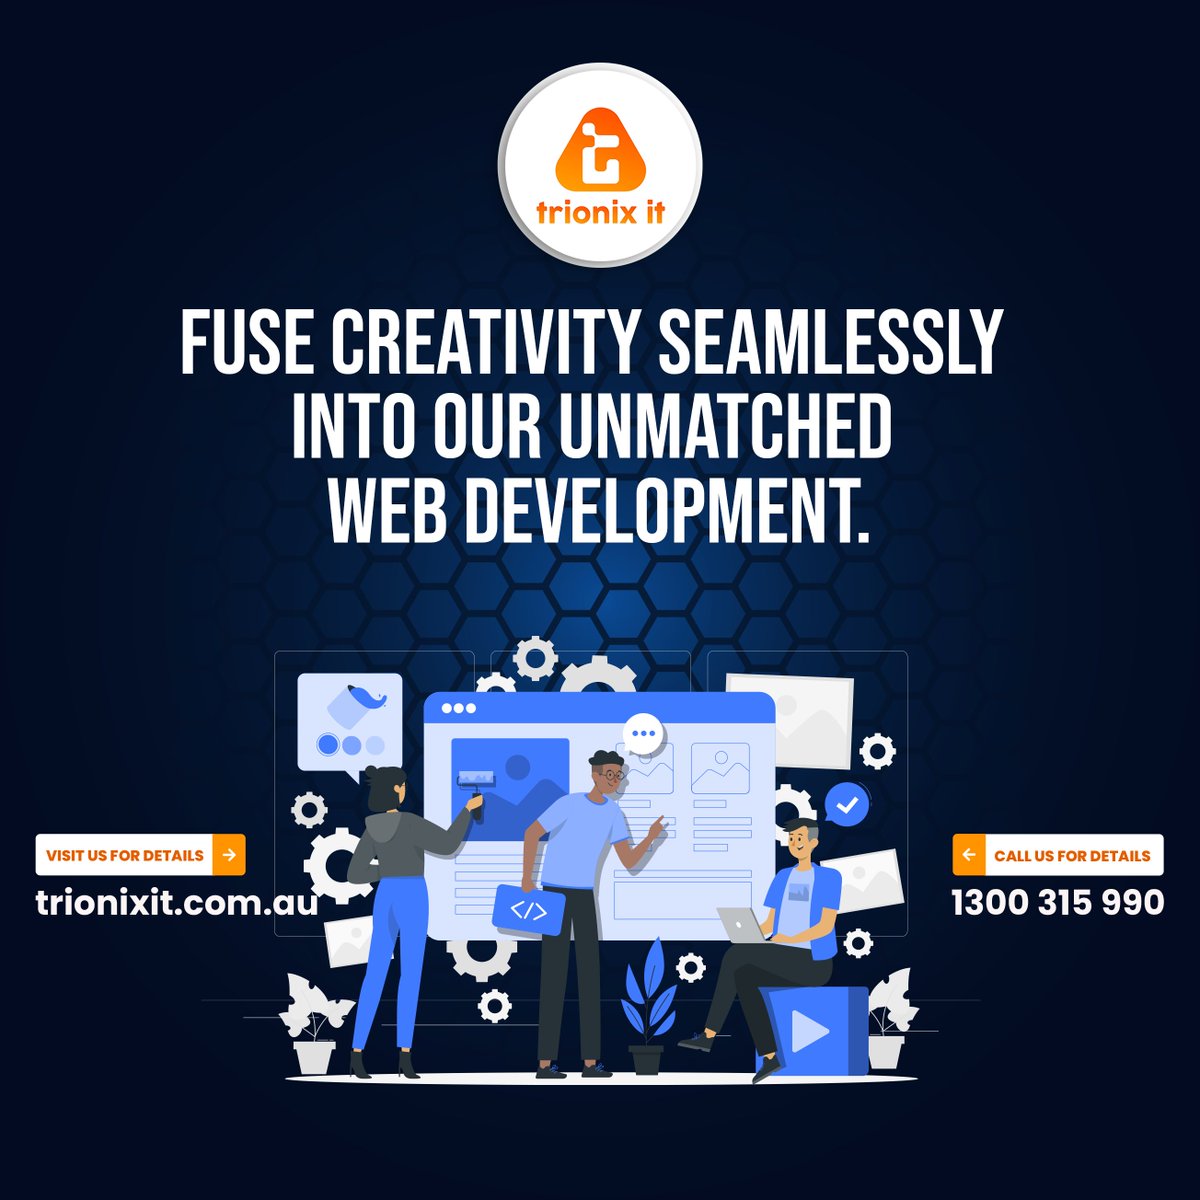 Unleash the boundless power of creativity as we seamlessly fuse it into our unparalleled web development projects! 💡💻 Let your imagination run wild as we craft digital experiences that defy expectations and redefine excellence. 

#CreativeWebDev #InnovationUnleashed